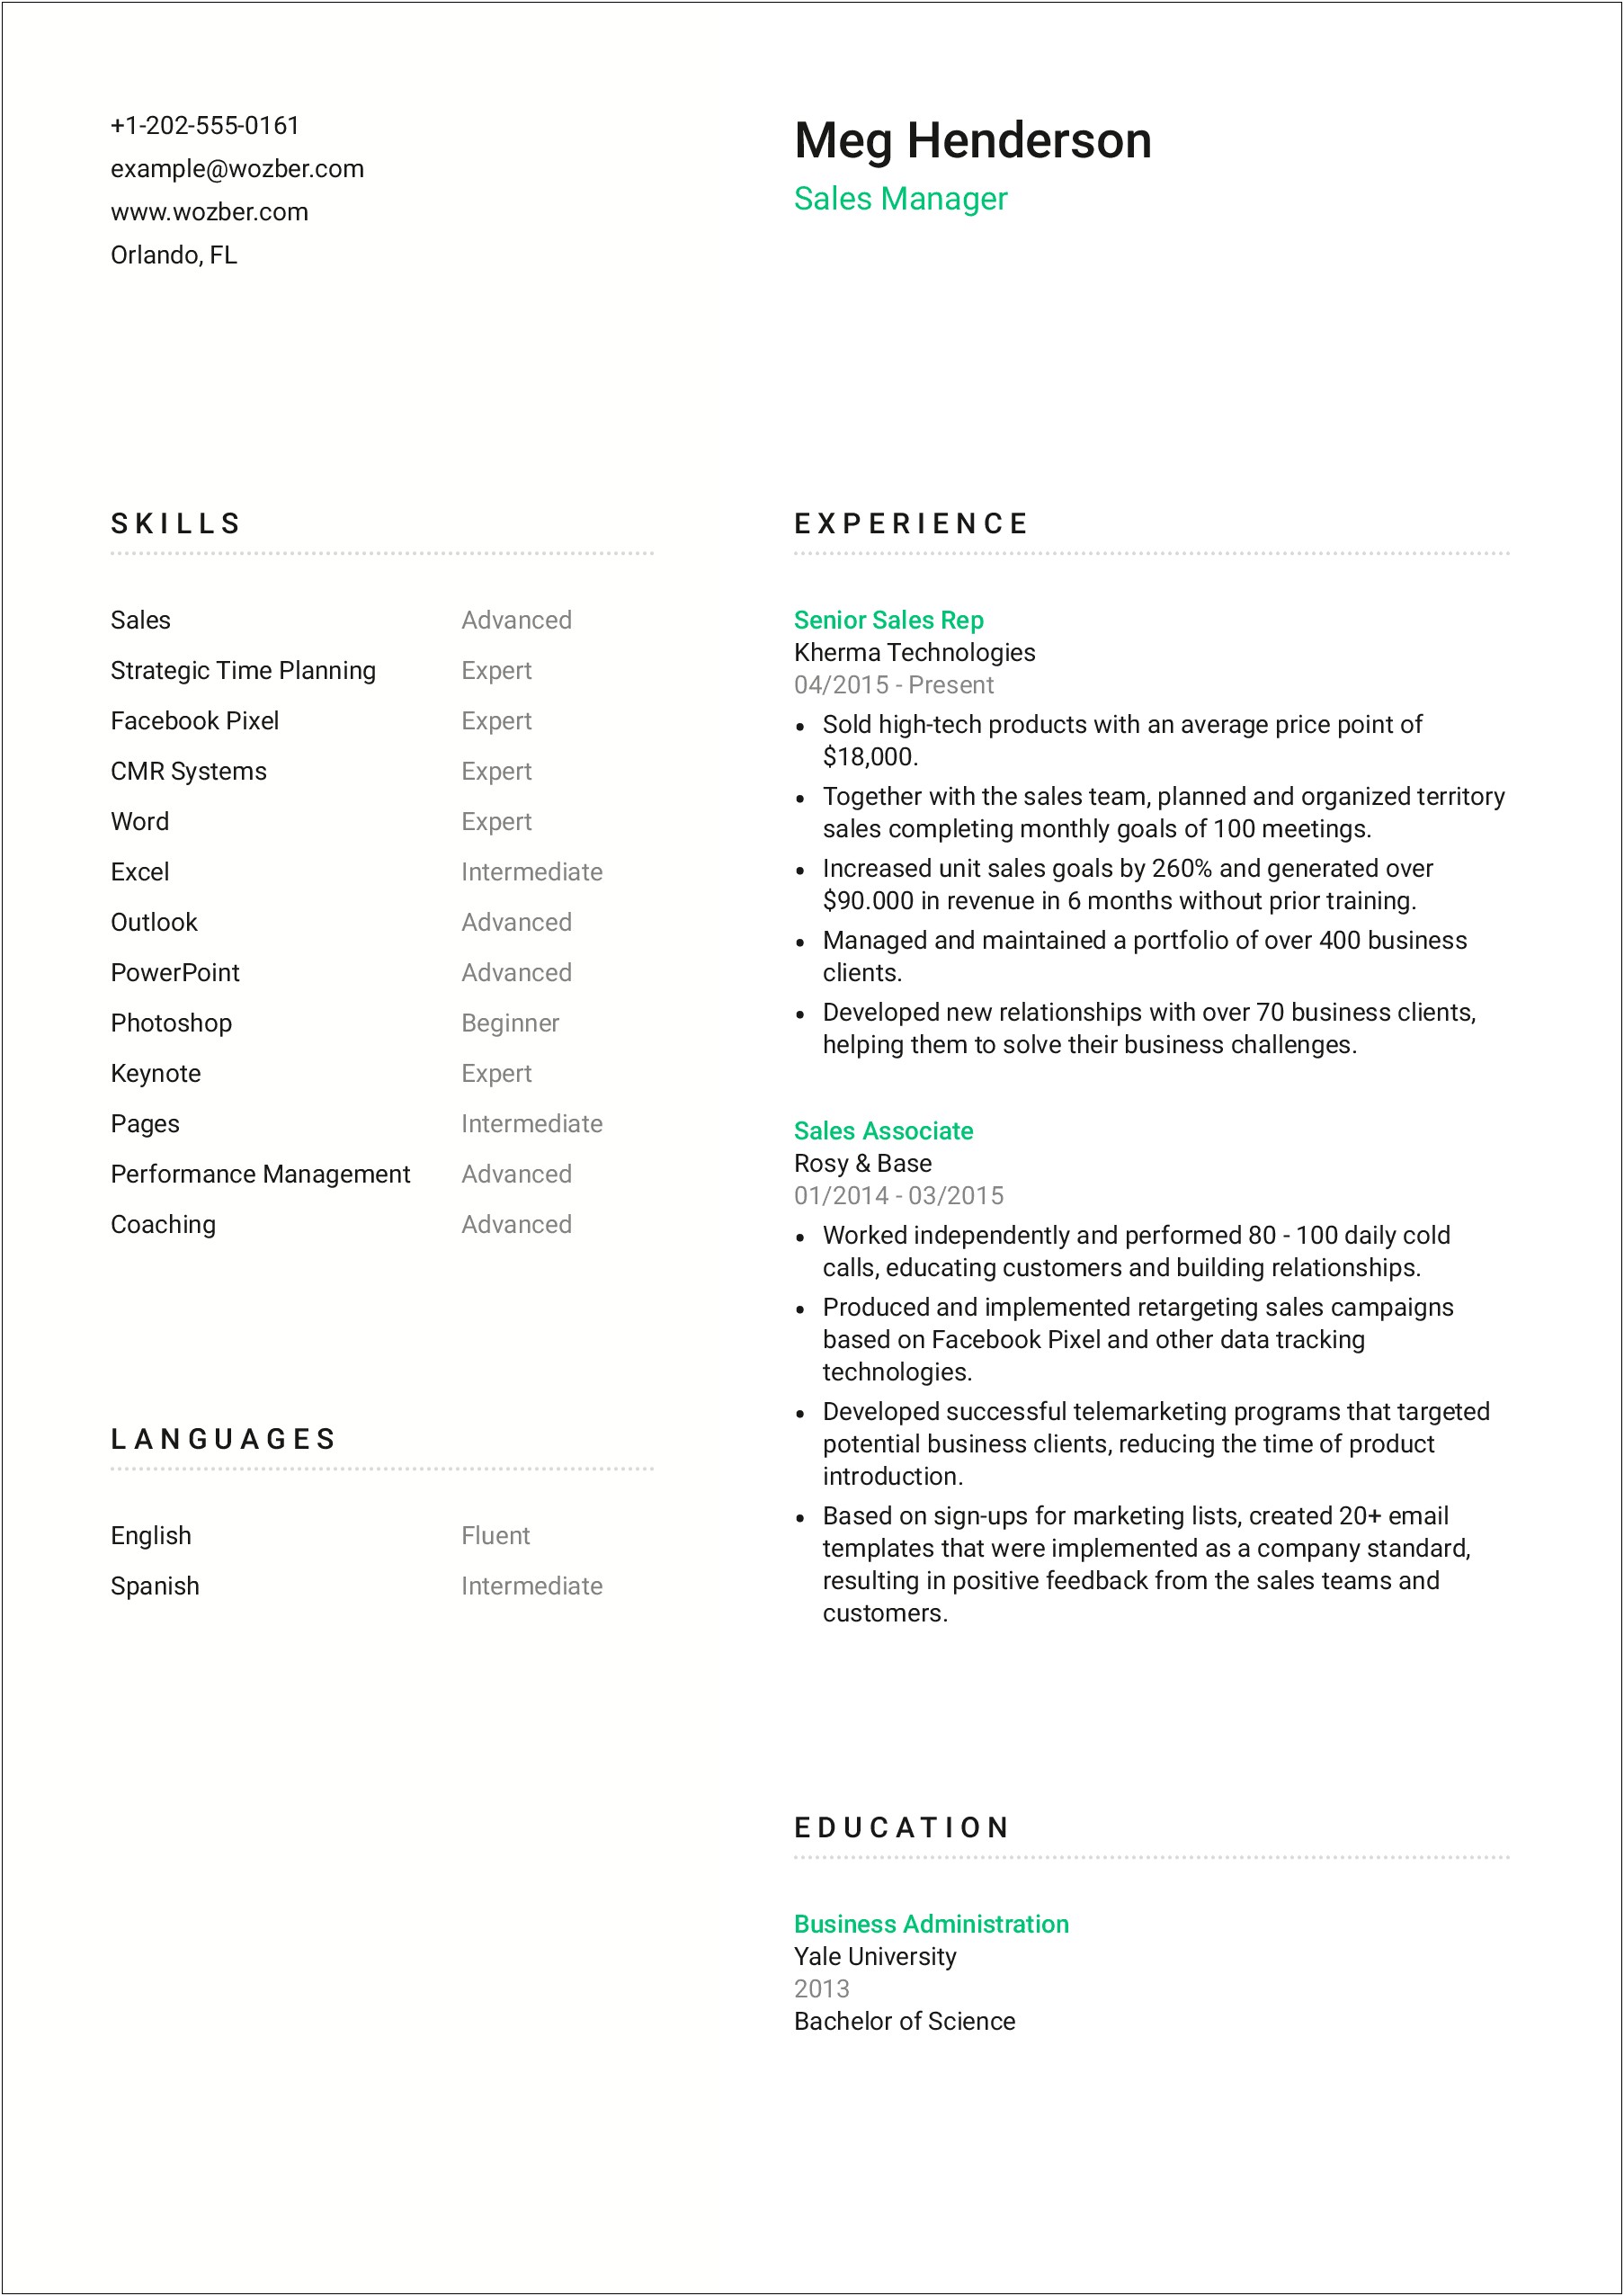 Resume For Experienced Sales Manager